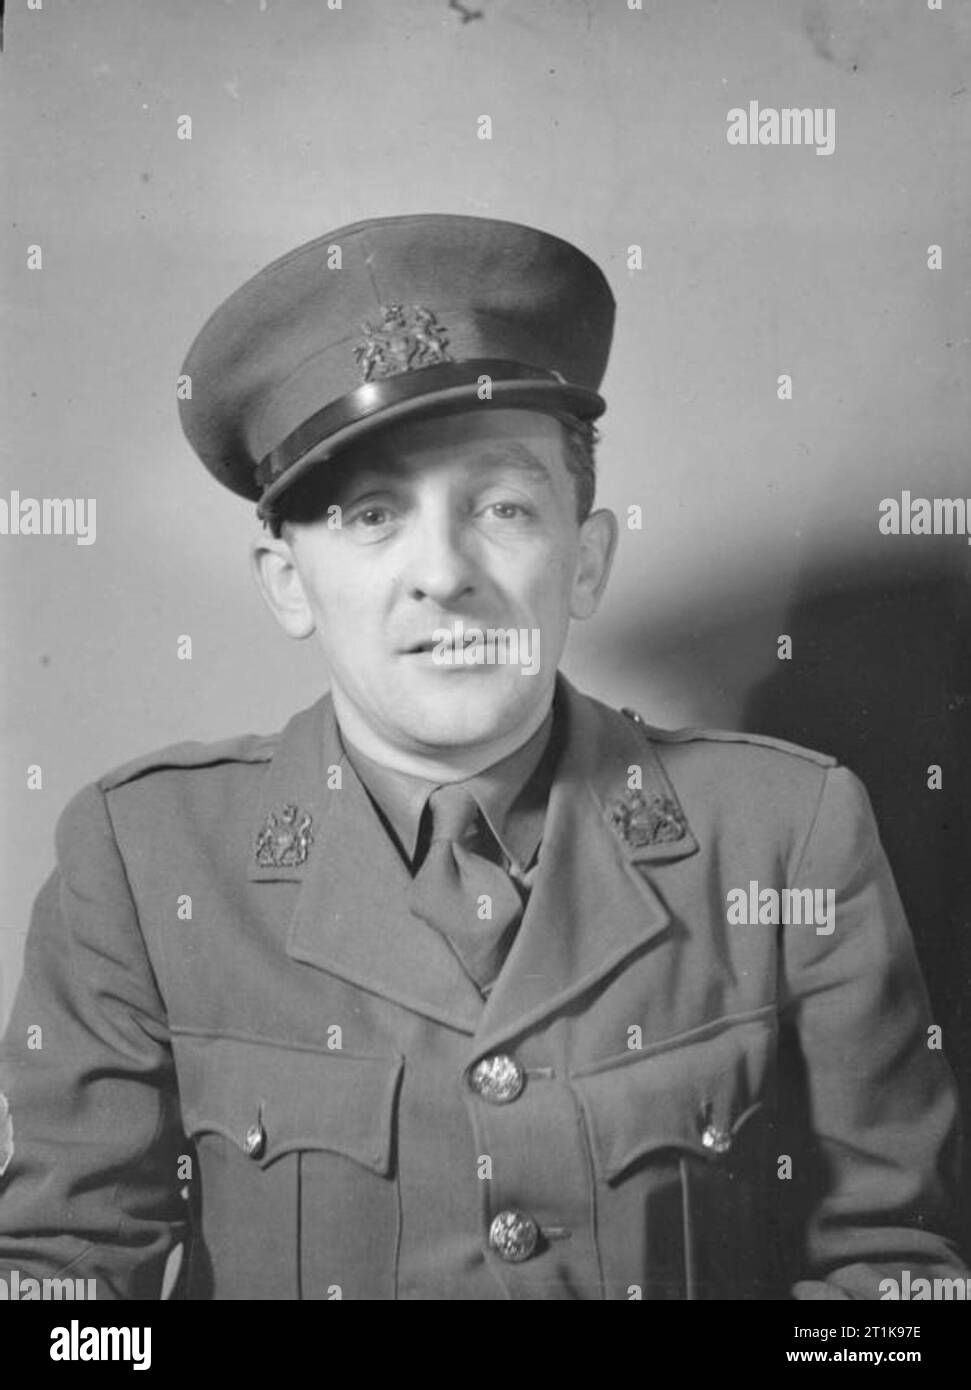 The British Army Film and Photographic Unit 1941 - 1947 Lieutenant E G Malindine, War Office Public Relations official photographer, in 1941. Lt Malindine served as one of the War Office official photographers in France, Britain and North West Europe from 1940 to 1945. During this time, he photographed numerous key events, including the Dunkirk evacuation in 1940, D Day, the liberation of Paris and Belsen, the German surrender to Field Marshal Montgomery and the Potsdam Conference. One of the most experienced photographers to serve with the AFPU, Malindine worked with James Jarche as a staff p Stock Photo